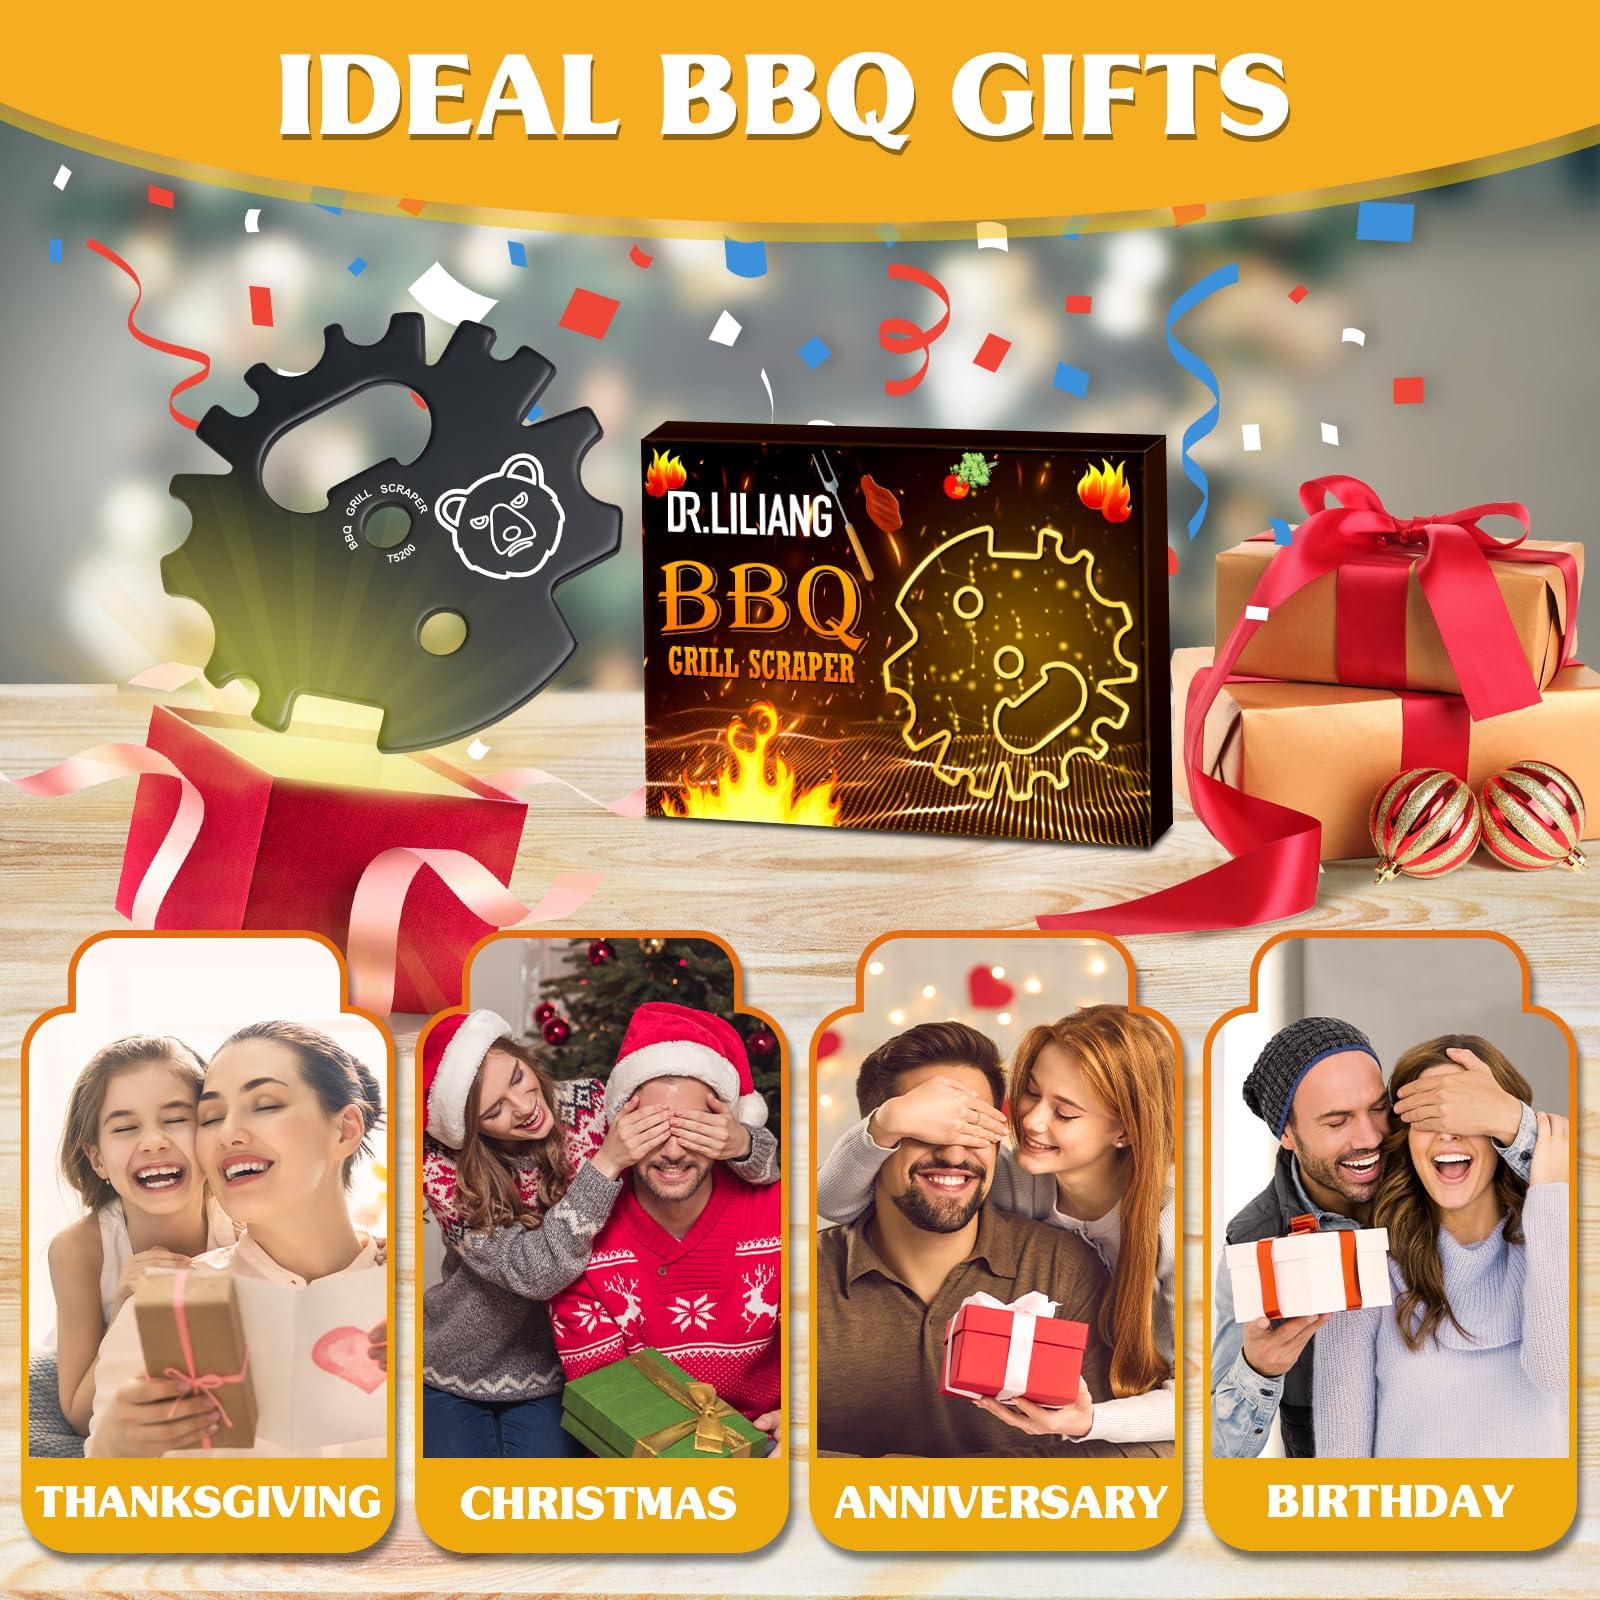 Grill Scraper Stocking Stuffers for Women Men: BBQ Gifts for Men Adults Teens Cool Kitchen Gadgets Smoker Accessories Outdoor Grate Grilling Cleaning Tools Unique Christmas Camping Cooking Gifts Ideas - CookCave